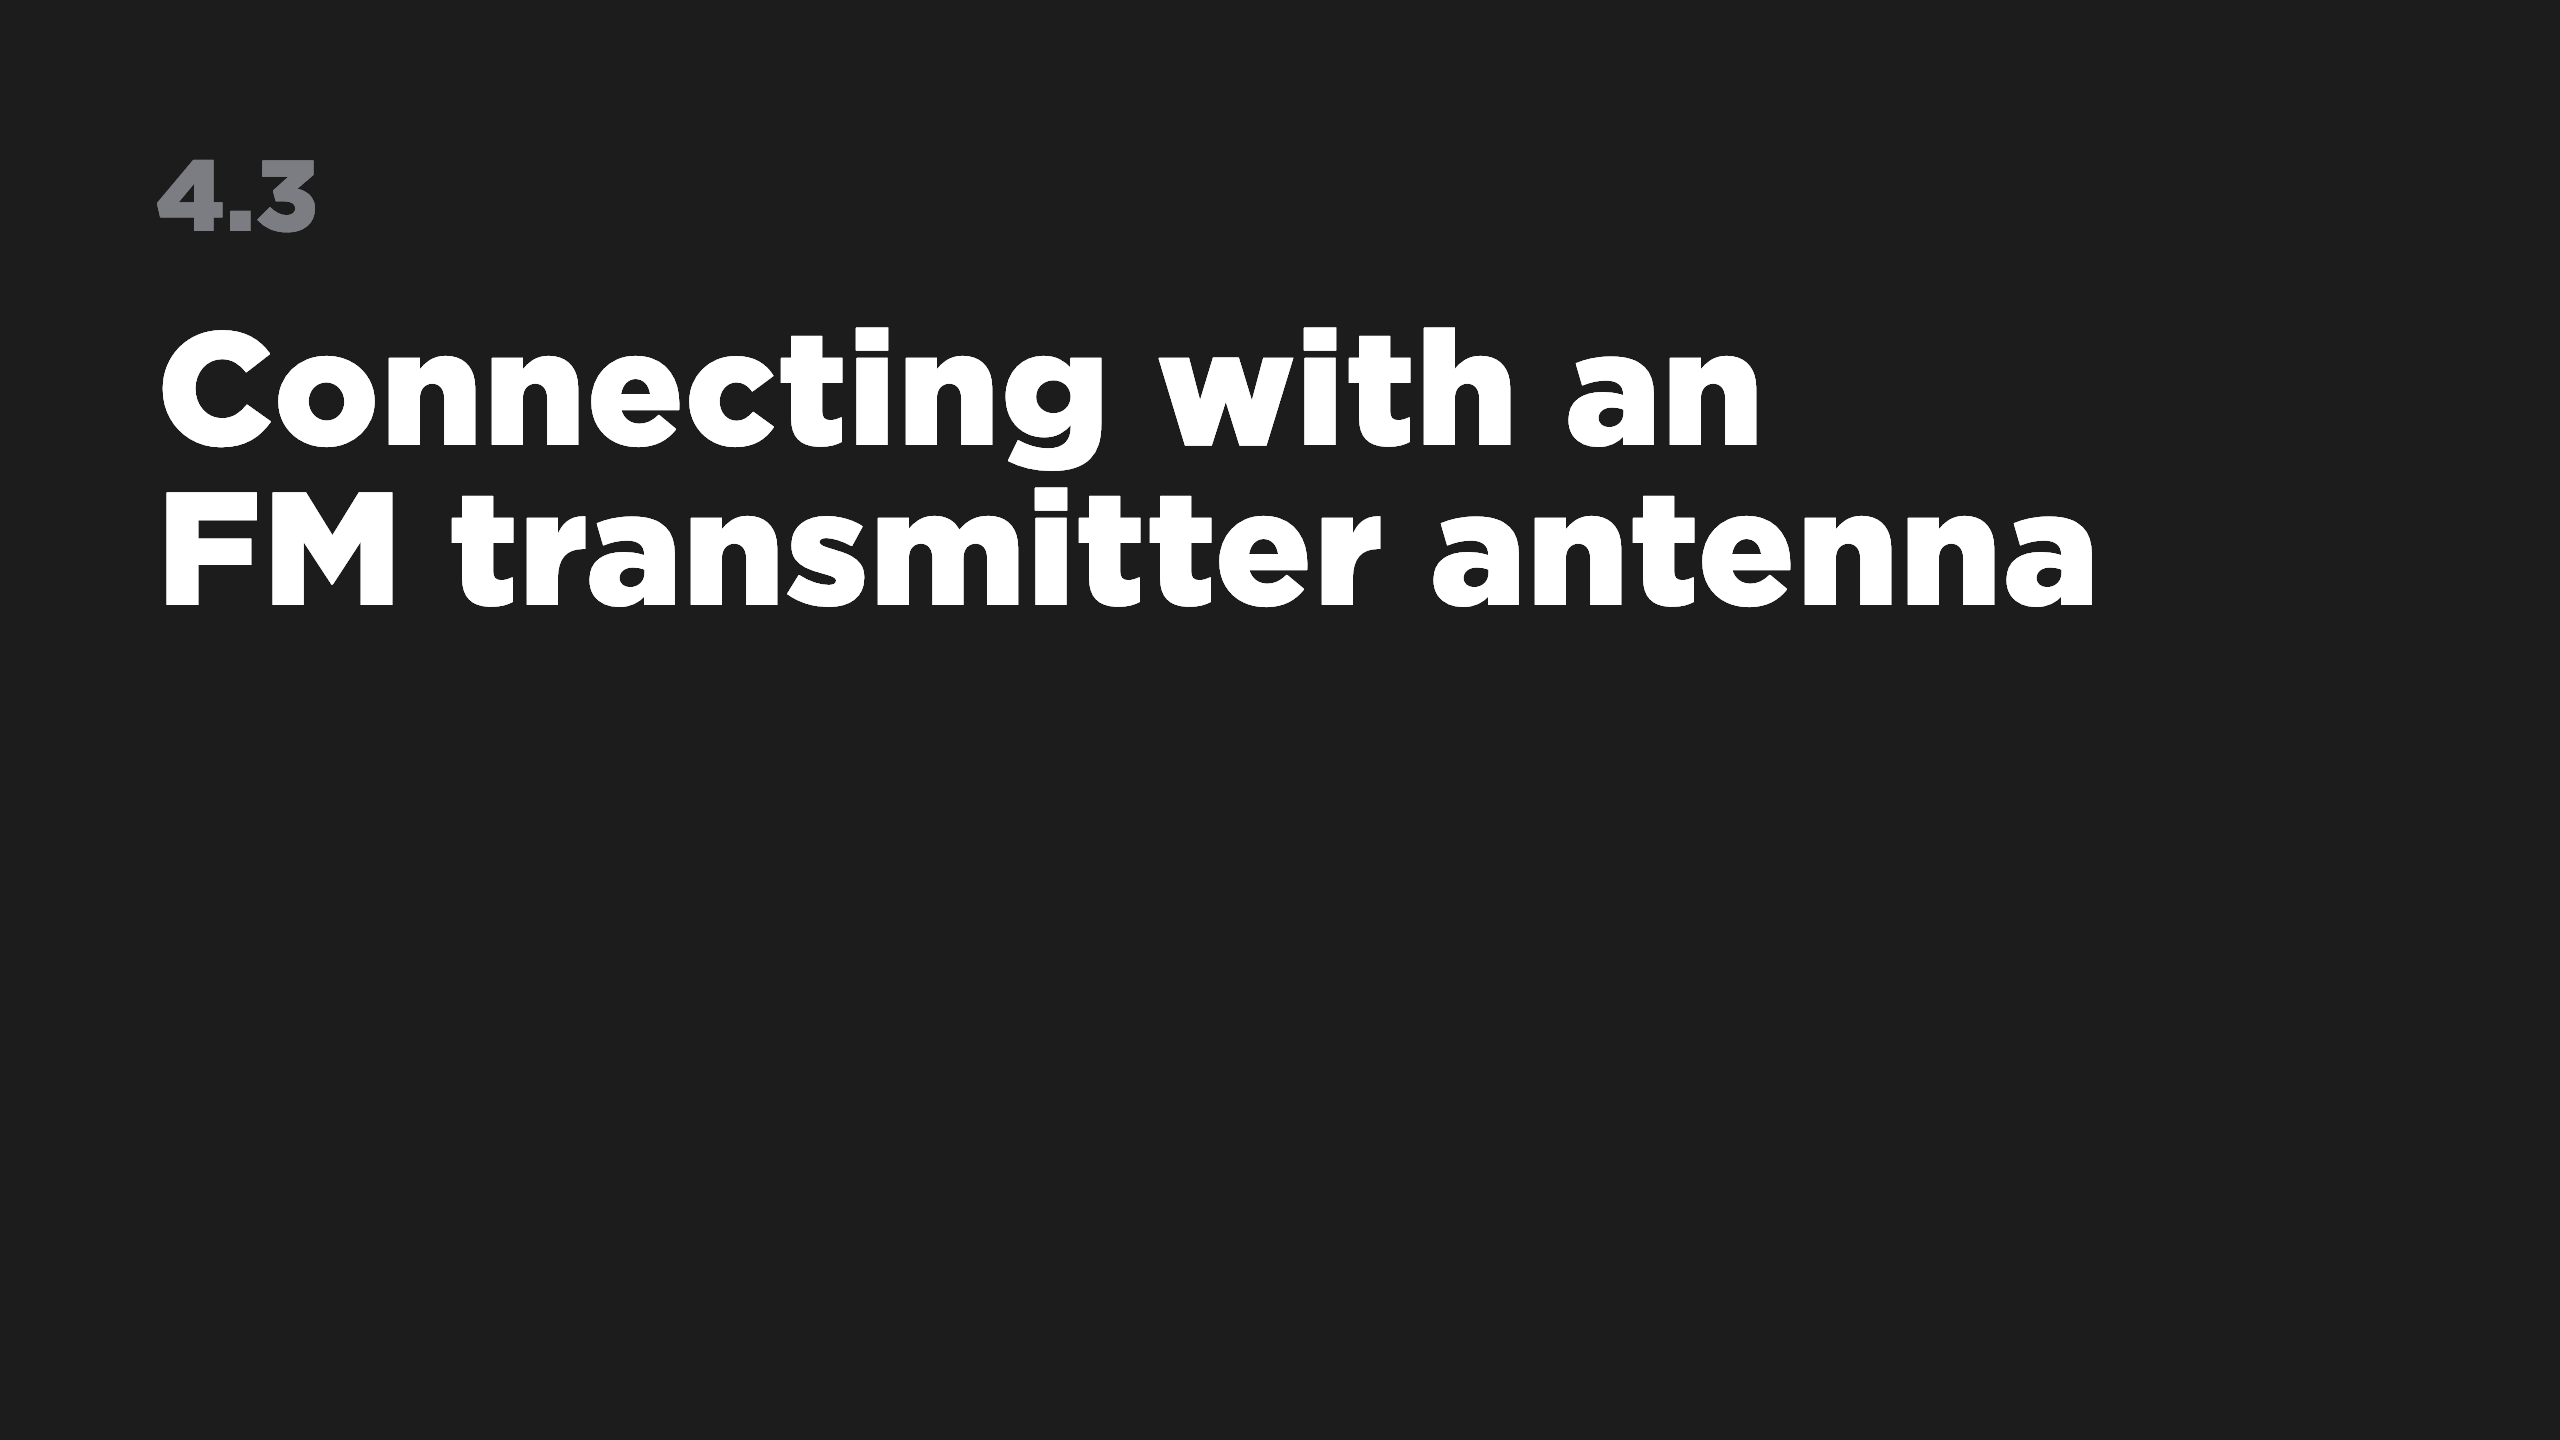 4.3 Connecting with an FM transmitter antenna